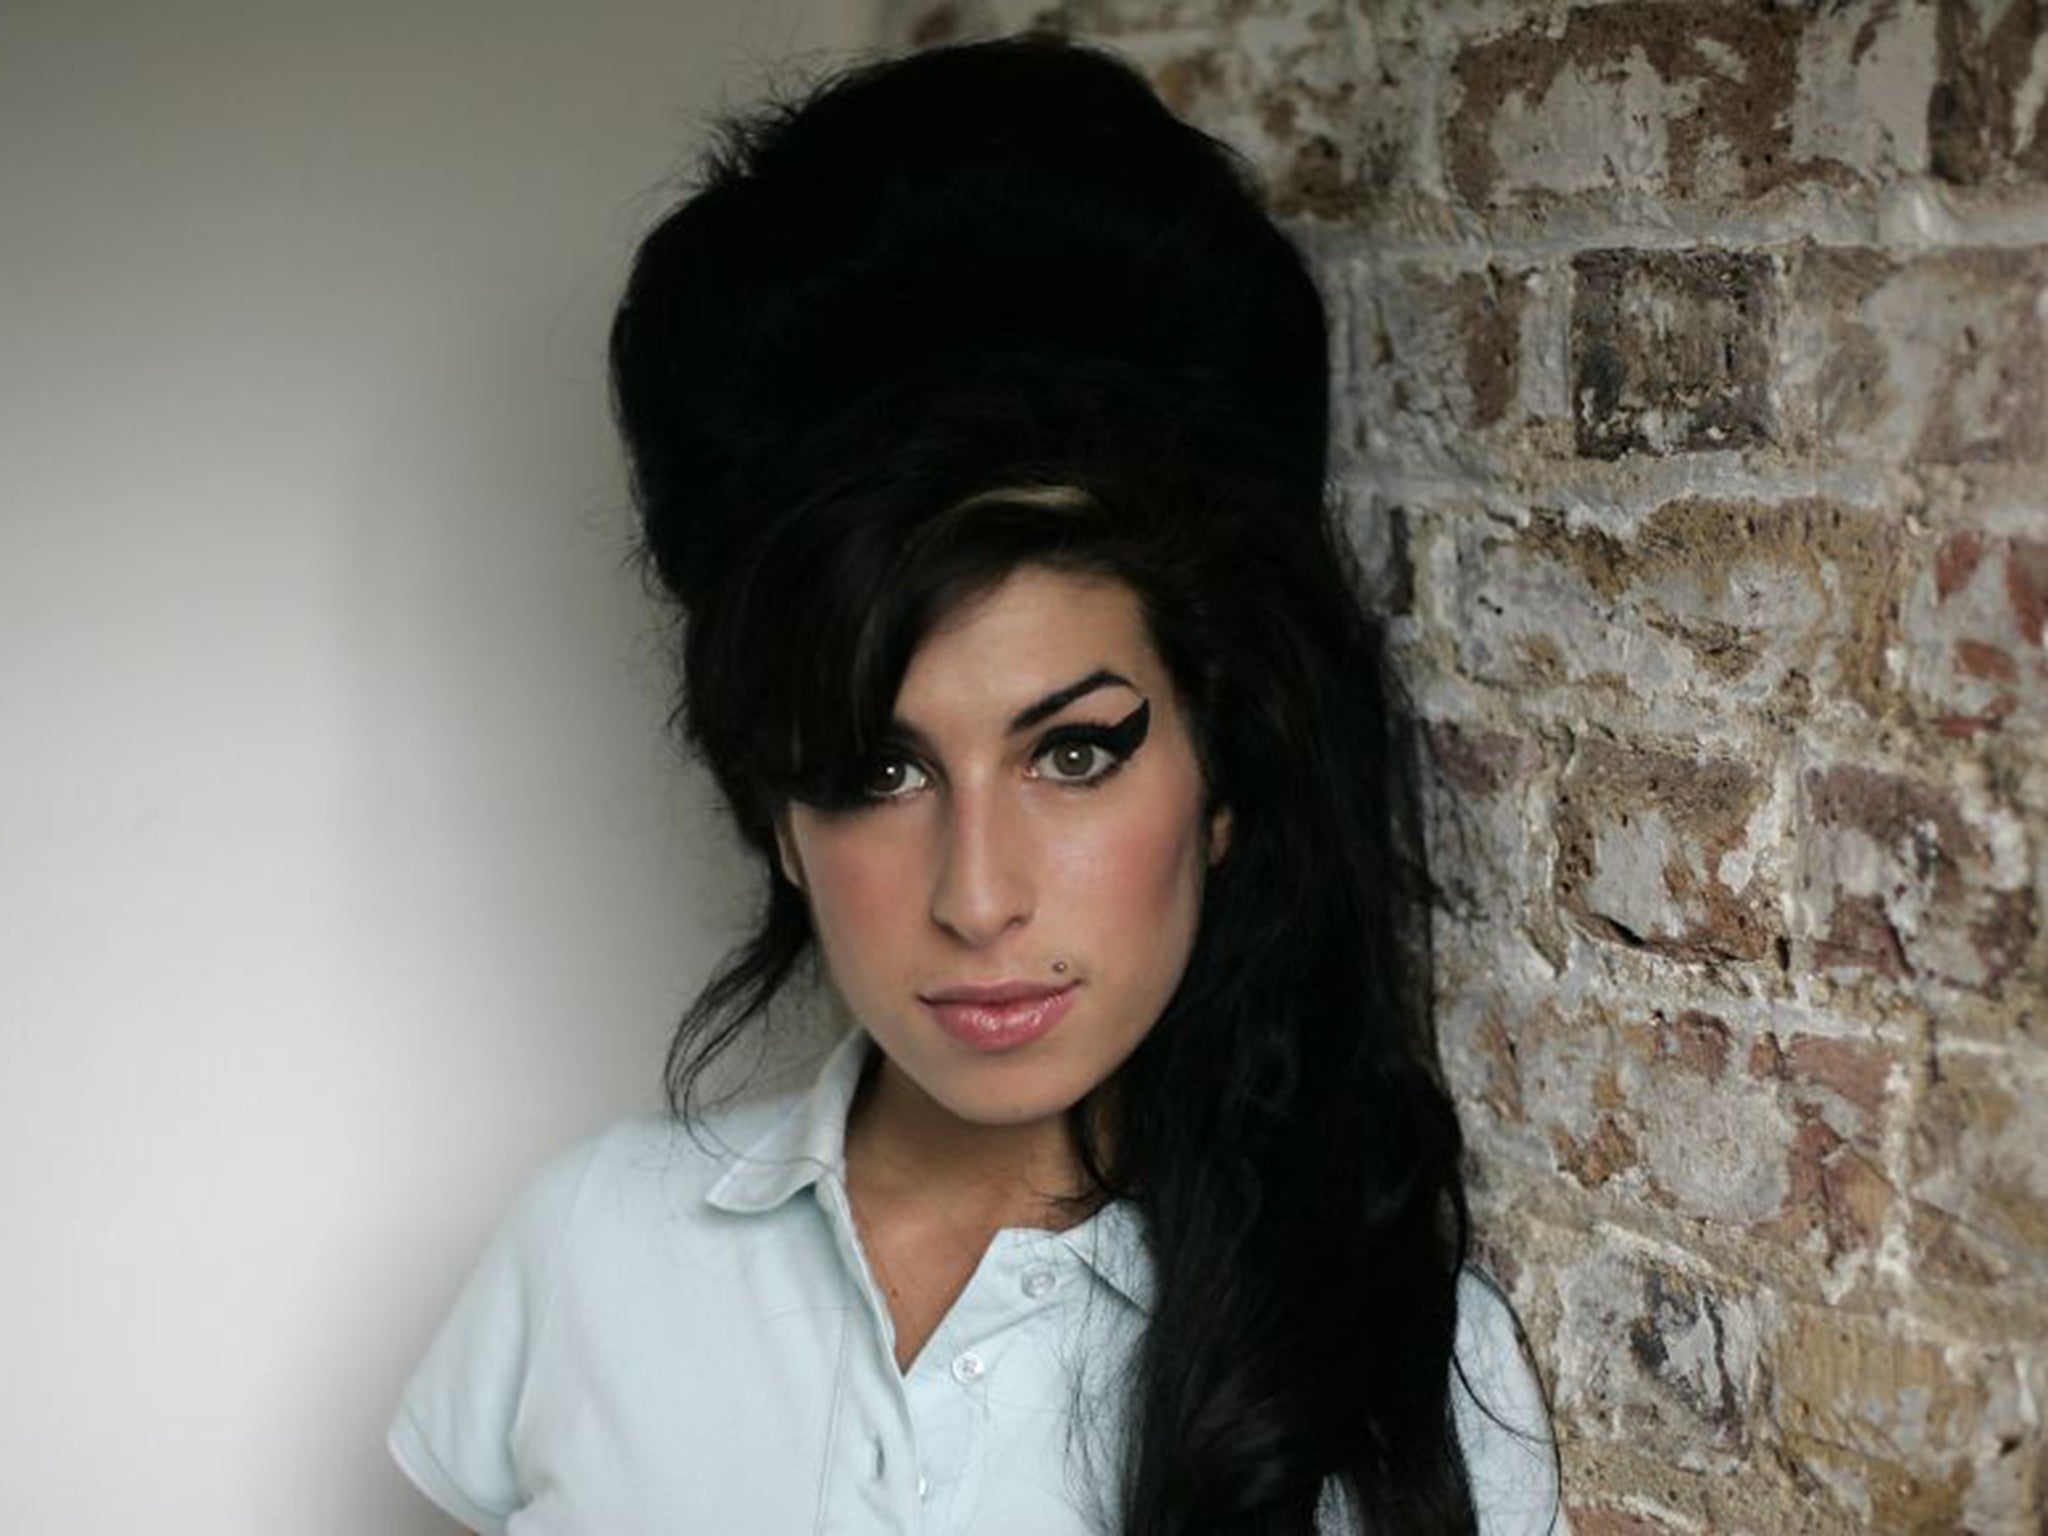 Amy Winehouse died from alcohol poisoning in 2011 aged only 27